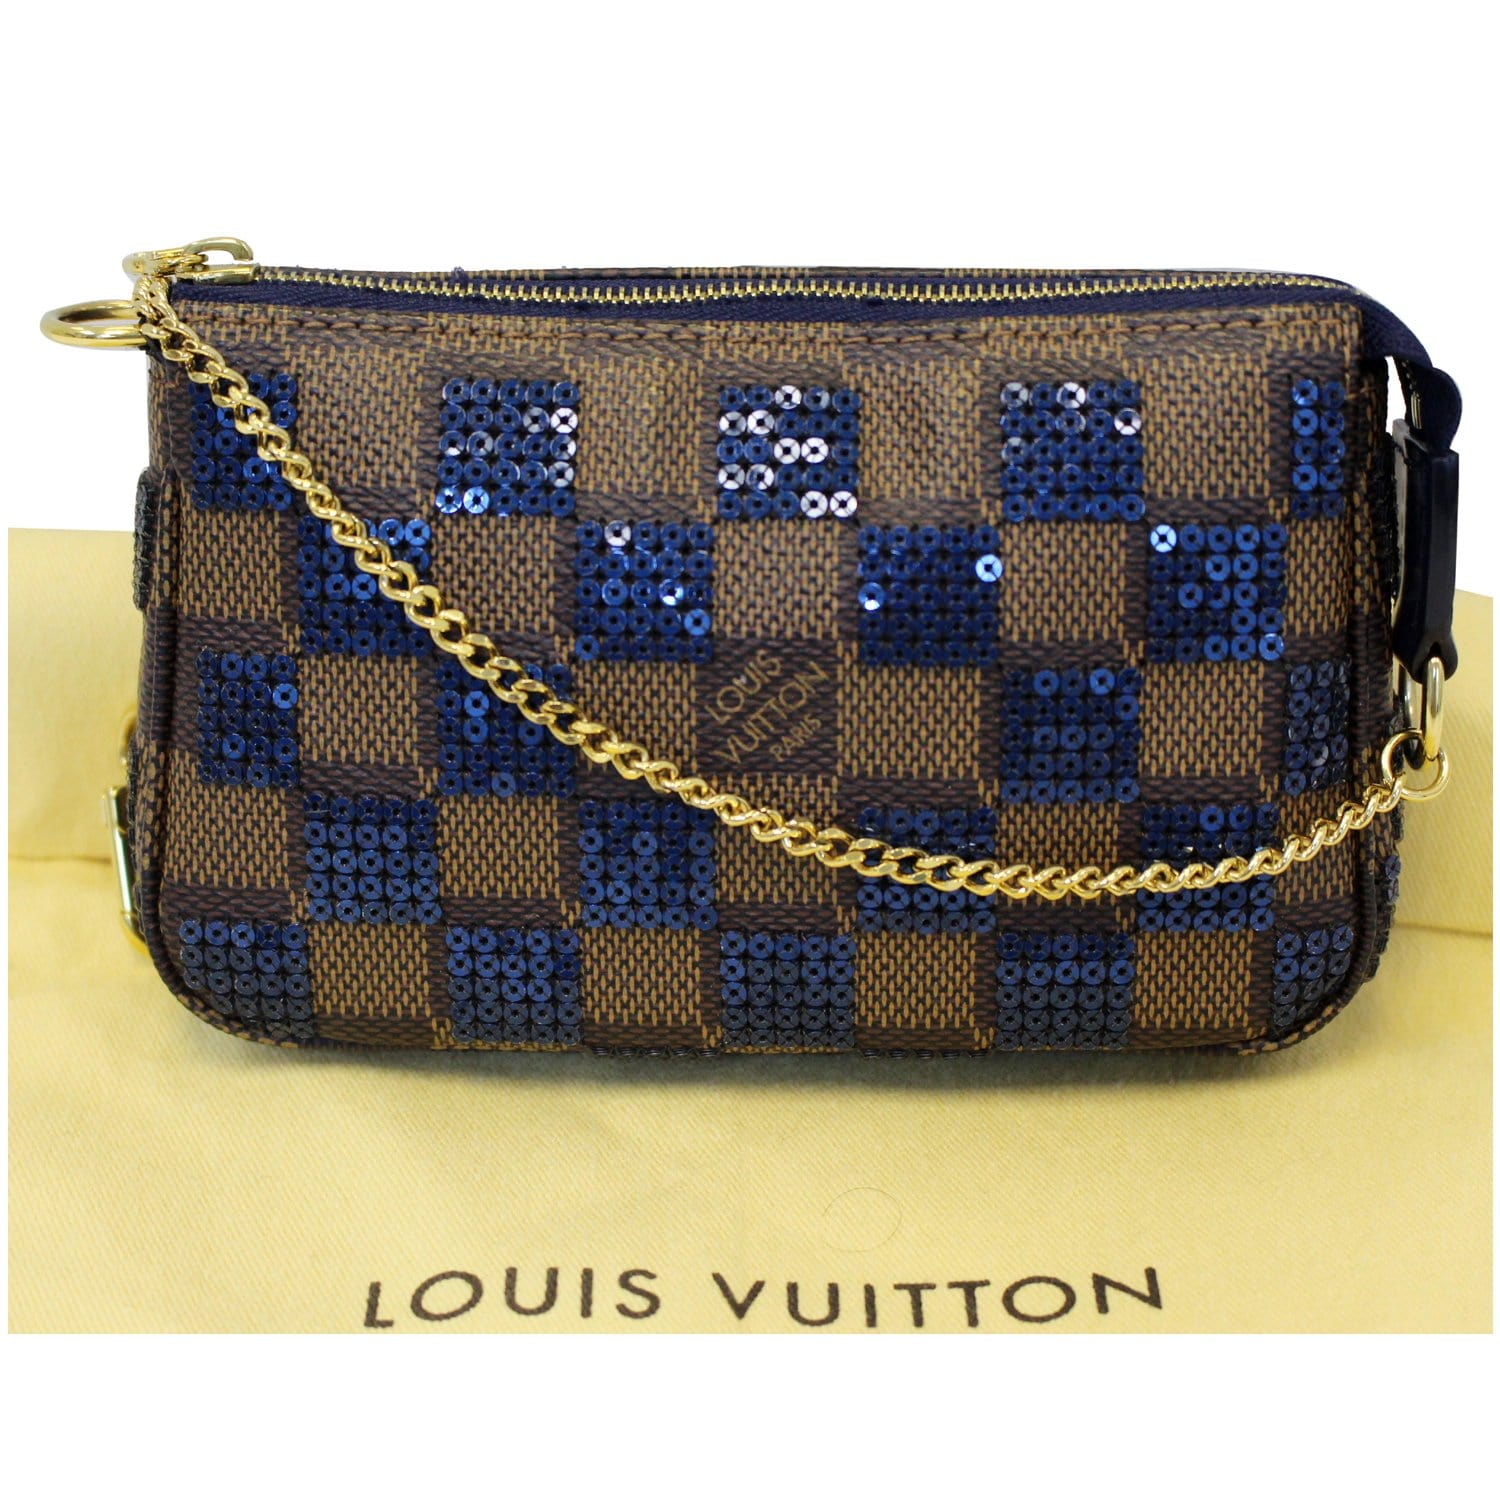 Unboxing this “new-to-me” Louis Vuitton Pochette Accessoires from